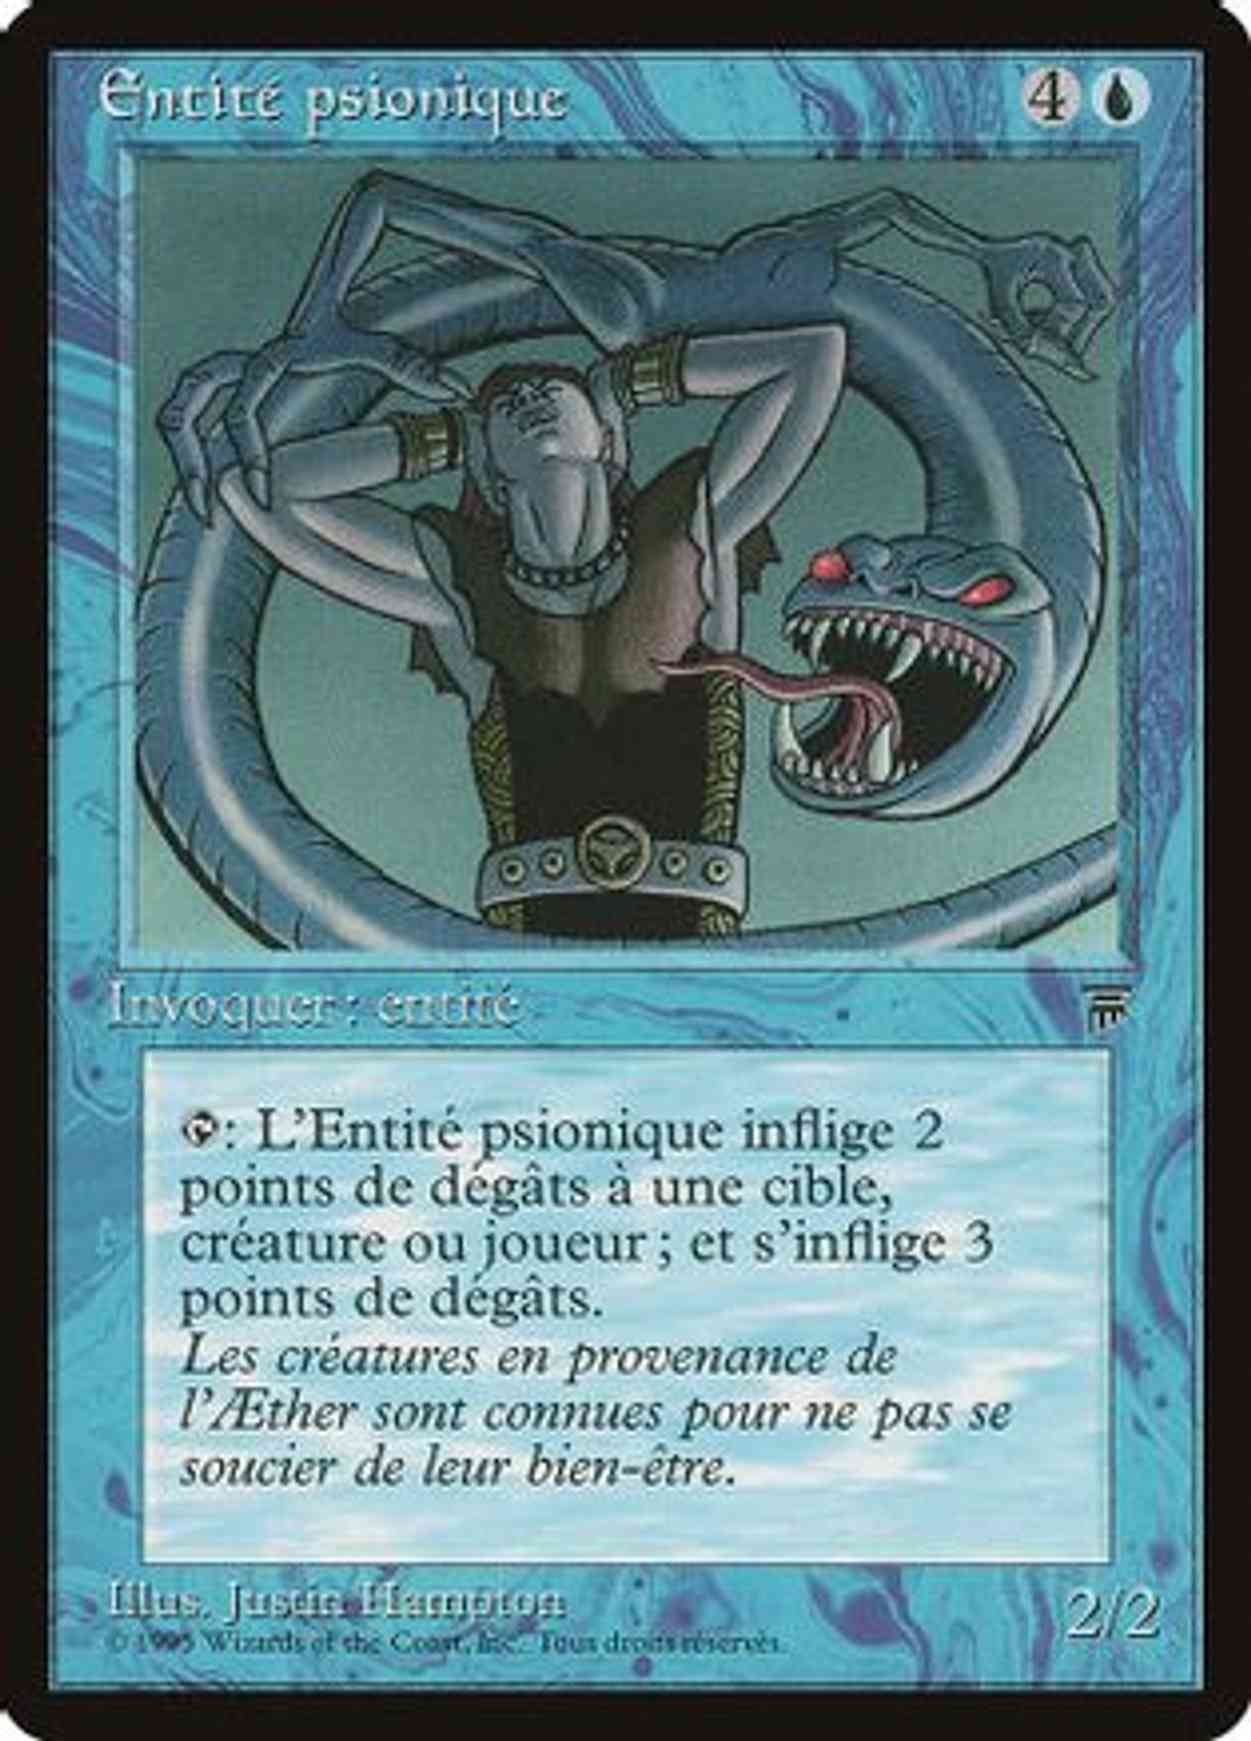 Psionic Entity (French) - "Entite psionique" magic card front